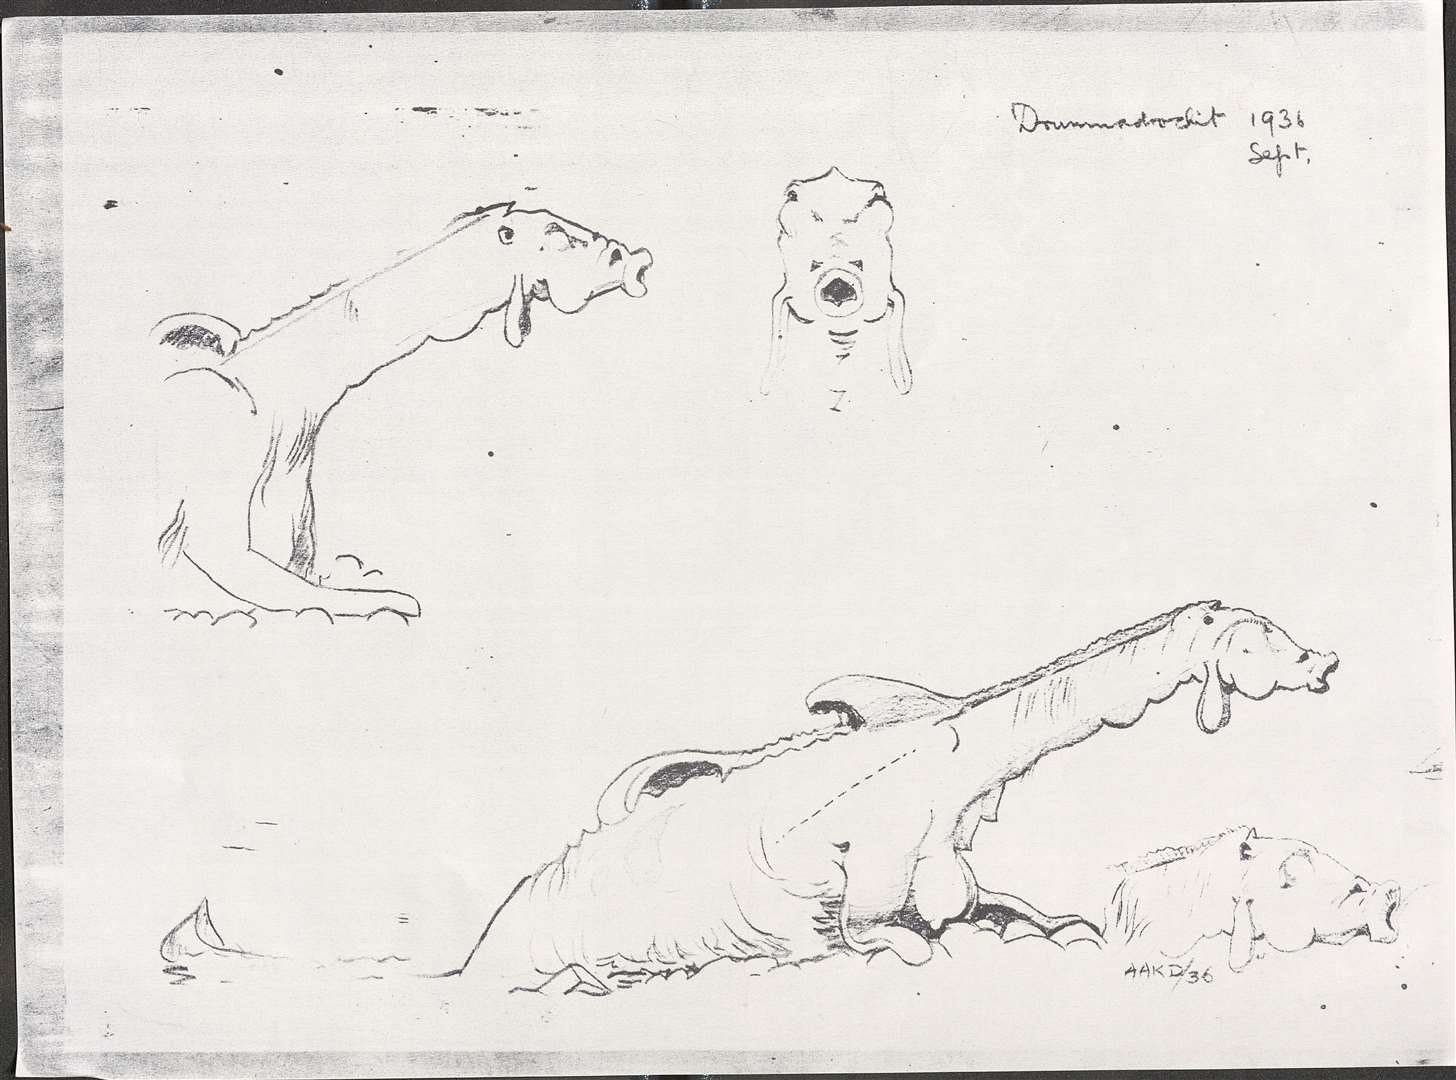 A sketch of the Loch Ness Monster in the collections held by National Museums Scotland.